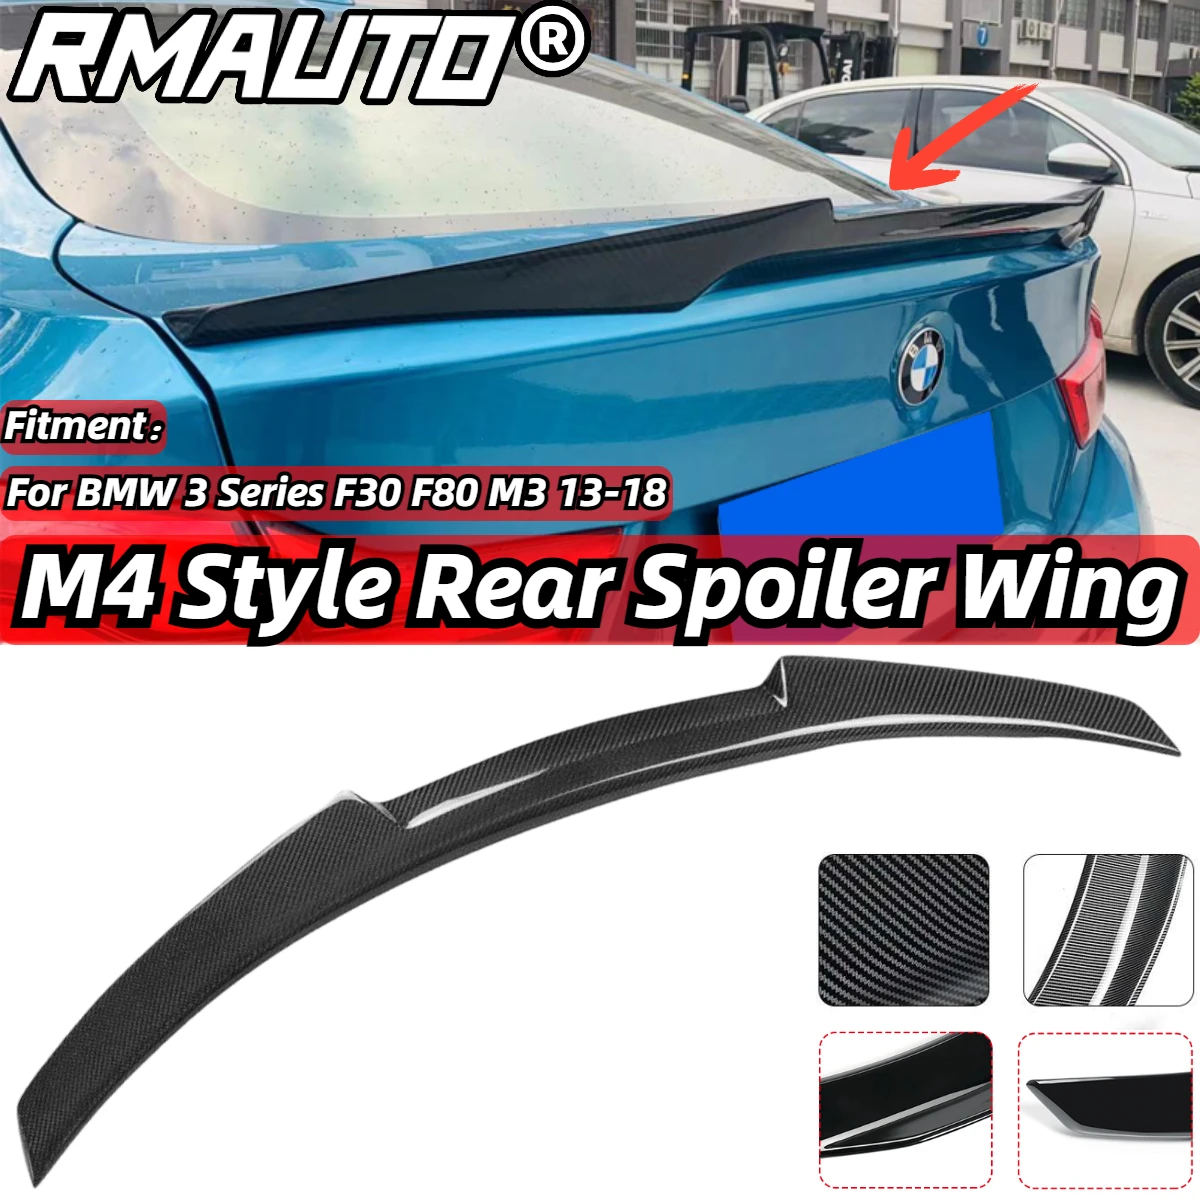 

RMAUTO Real Carbon Fiber Rear Spoiler M4 Style Wing Body Kit For BMW 3 Series F30 F80 M3 2013-2018 Rear Truck Wing Spoiler